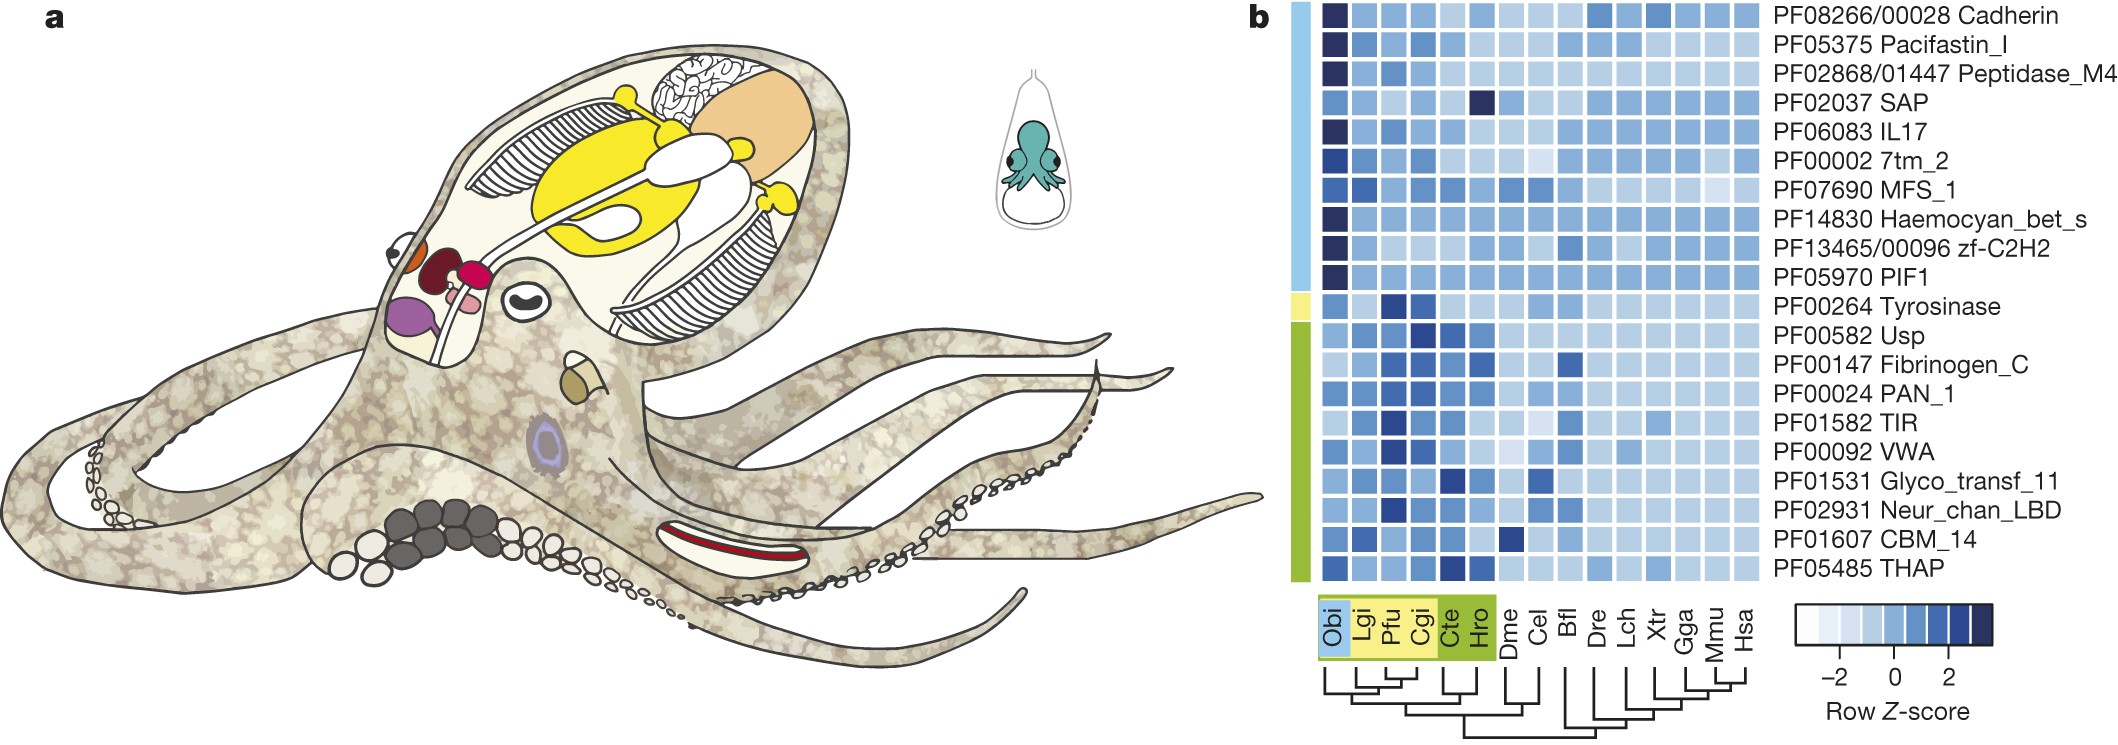 The octopus genome and the evolution of cephalopod neural and morphological  novelties | Nature